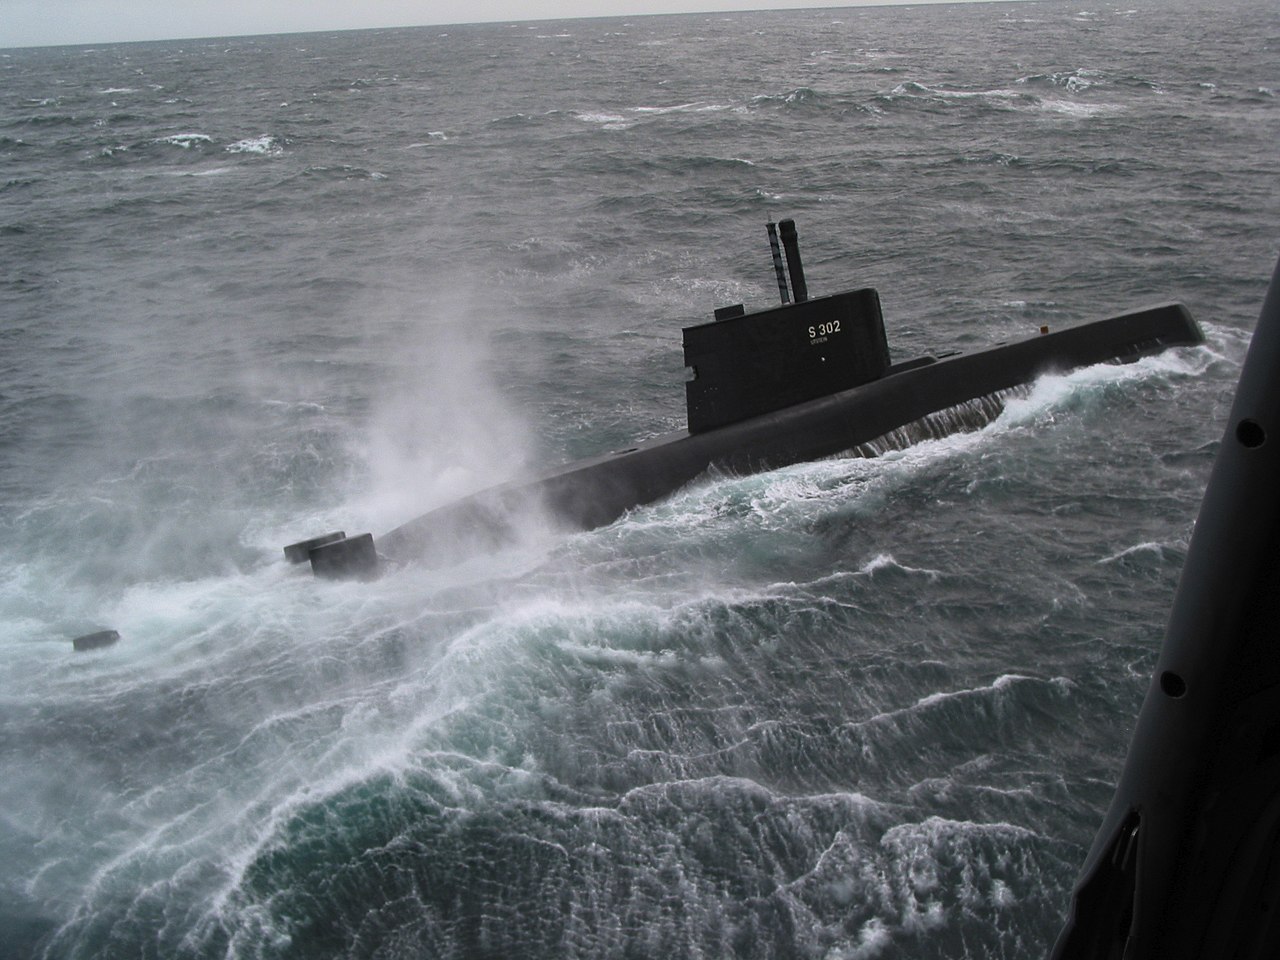 1280px-The_Norwegian_ULA_class_submarine_Utstein_%28KNM_302%29_participates_in_NATO_exercise_Odin-One.jpg